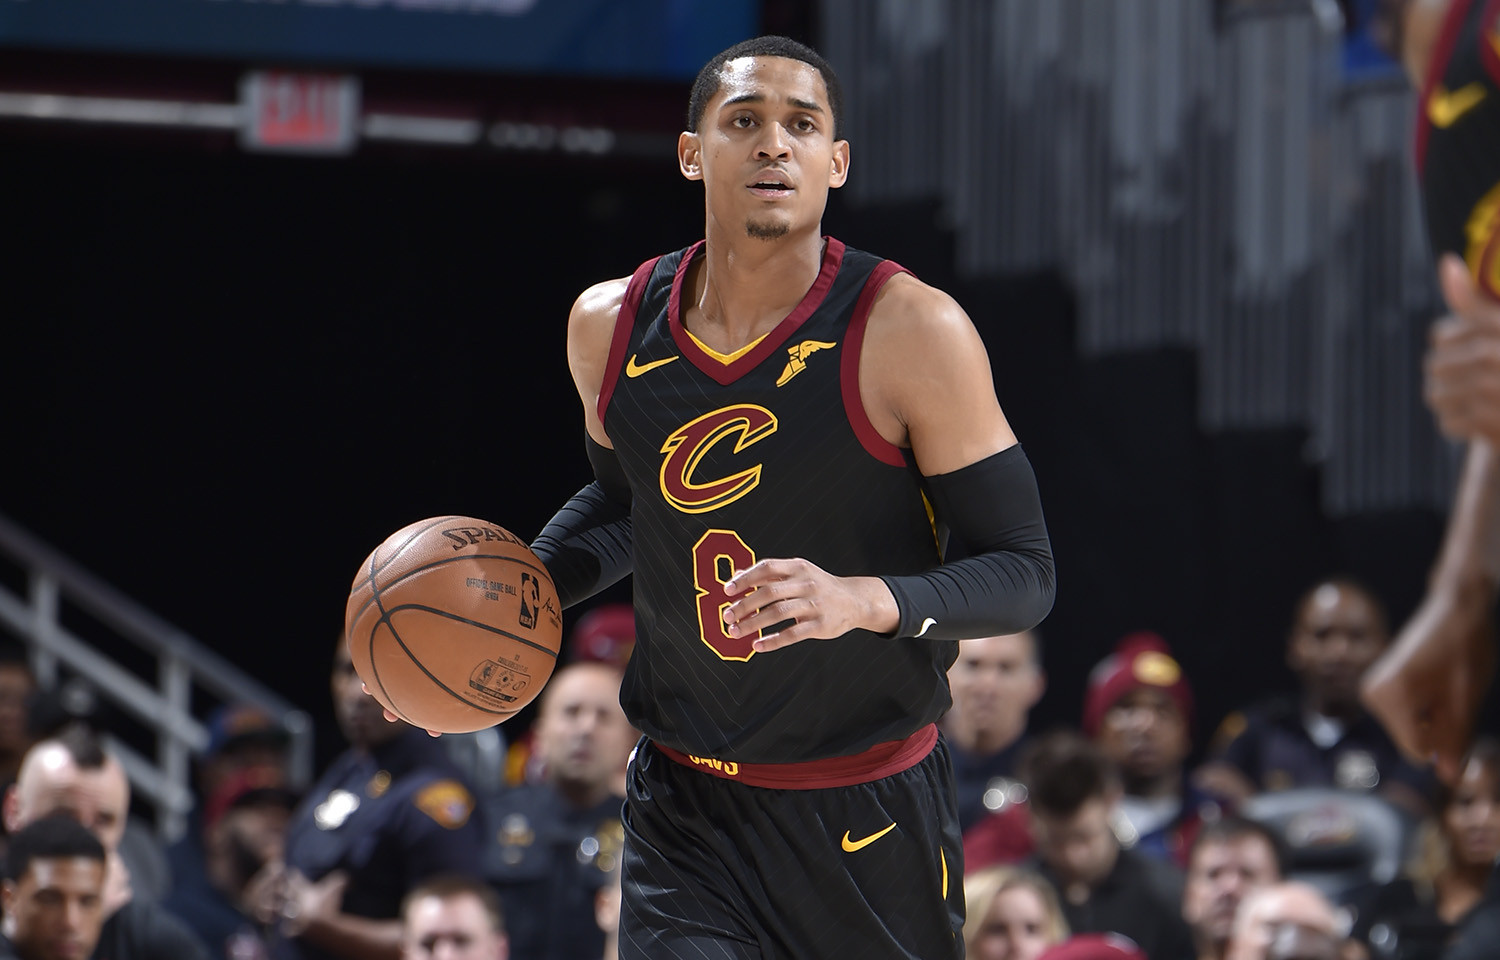 Jordan Clarkson will not be able to make his debut for the Philippines at the Asian Games after the NBA blocked his participation 